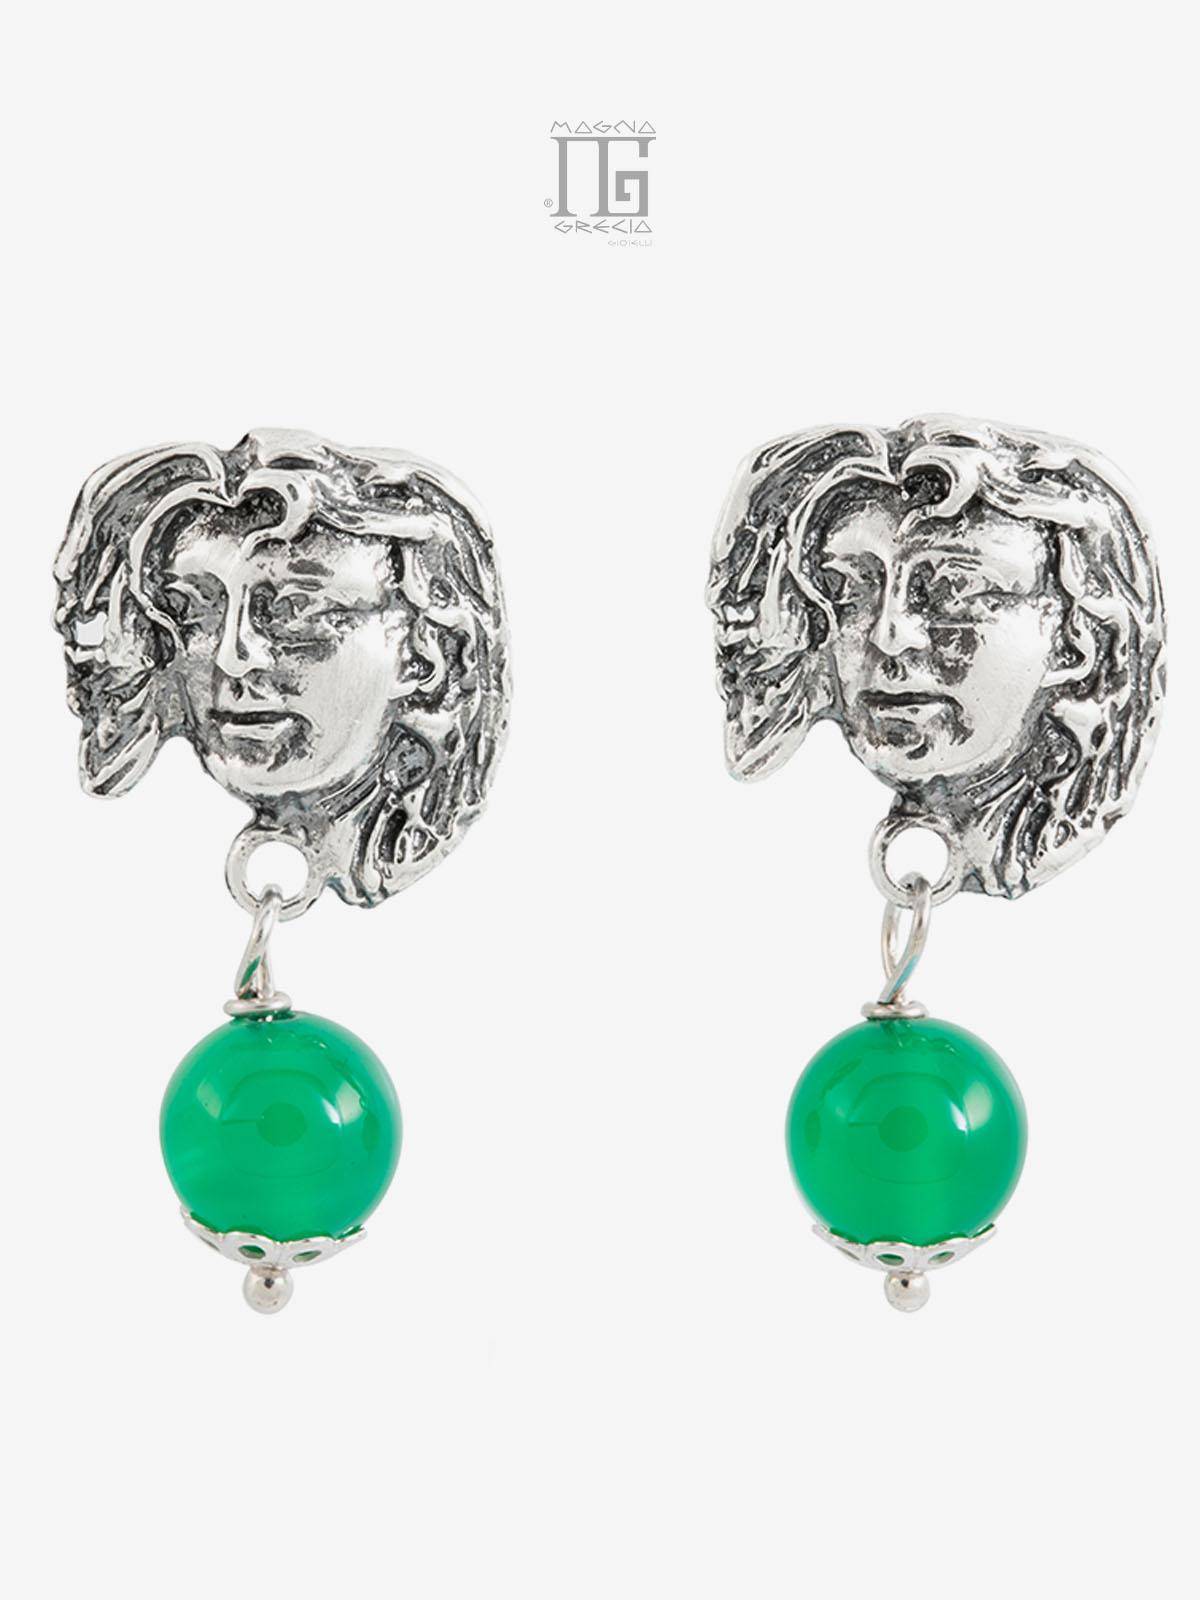 “Fortuna” earrings in silver with the face of the goddess Venus and green agate stone Cod. MGK 3852 V-2